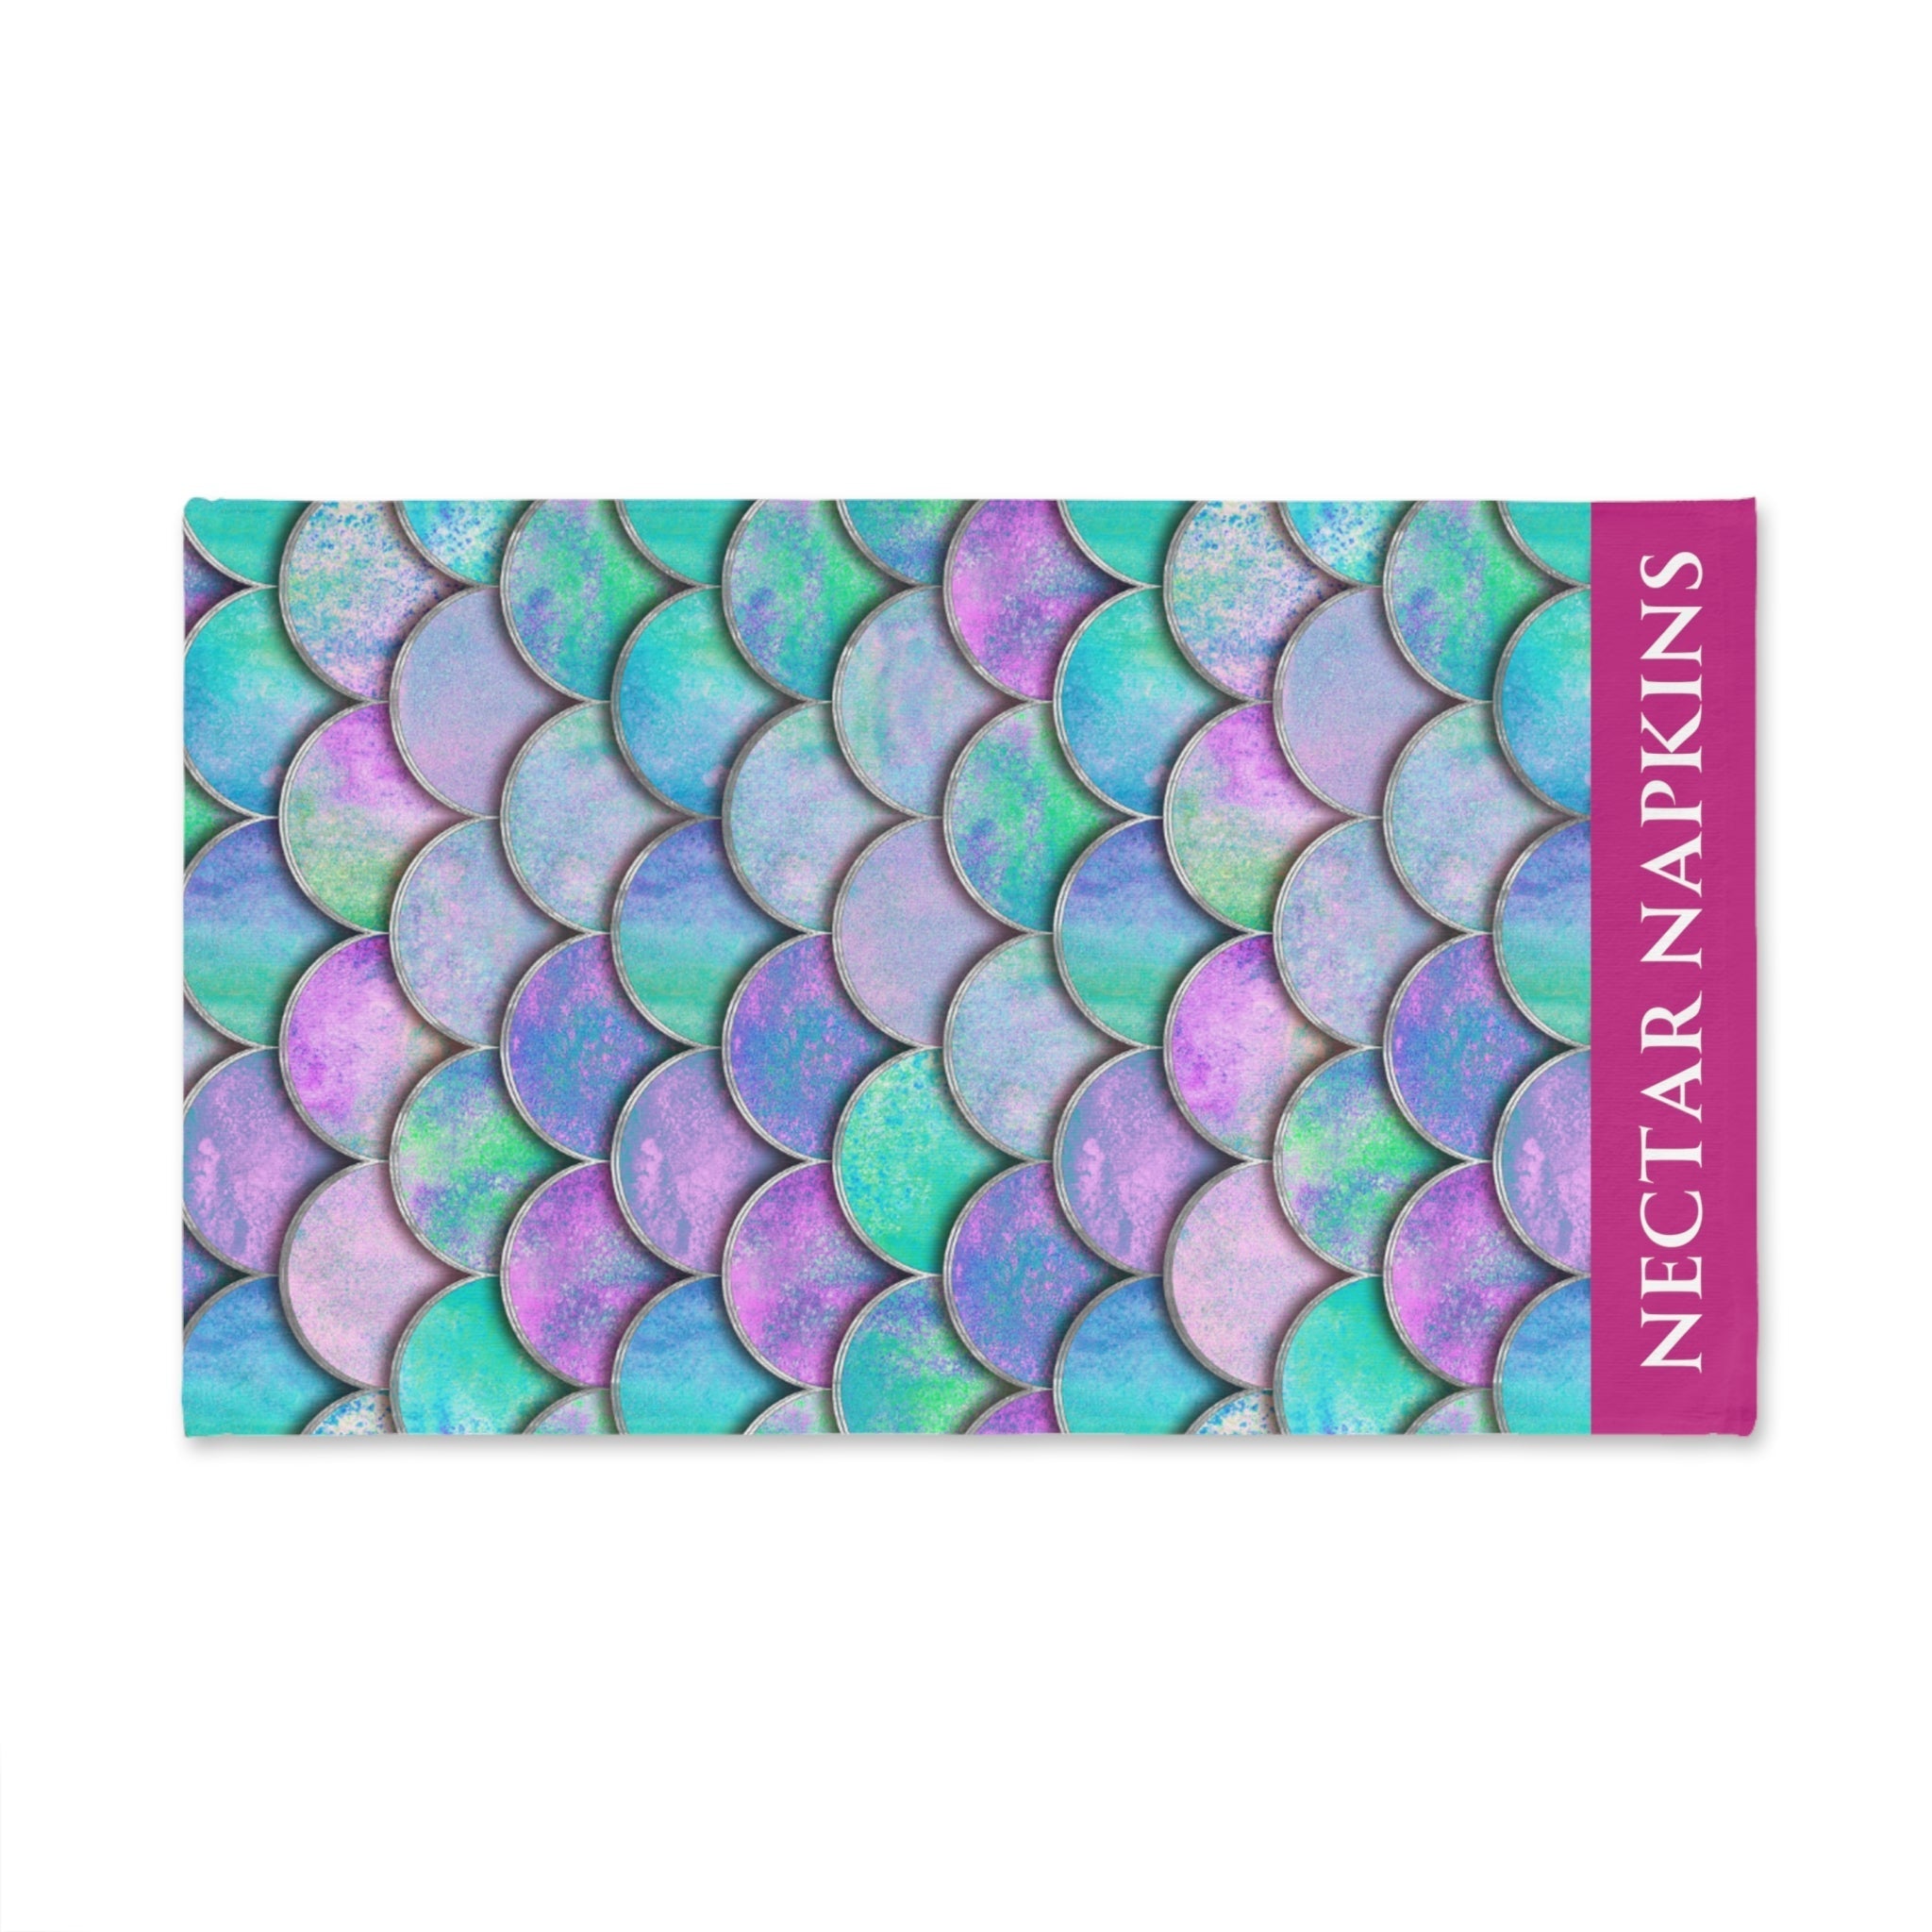 Mermaid Scale Fuscia | Funny Gifts for Men - Gifts for Him - Birthday Gifts for Men, Him, Husband, Boyfriend, New Couple Gifts, Fathers & Valentines Day Gifts, Hand Towels NECTAR NAPKINS